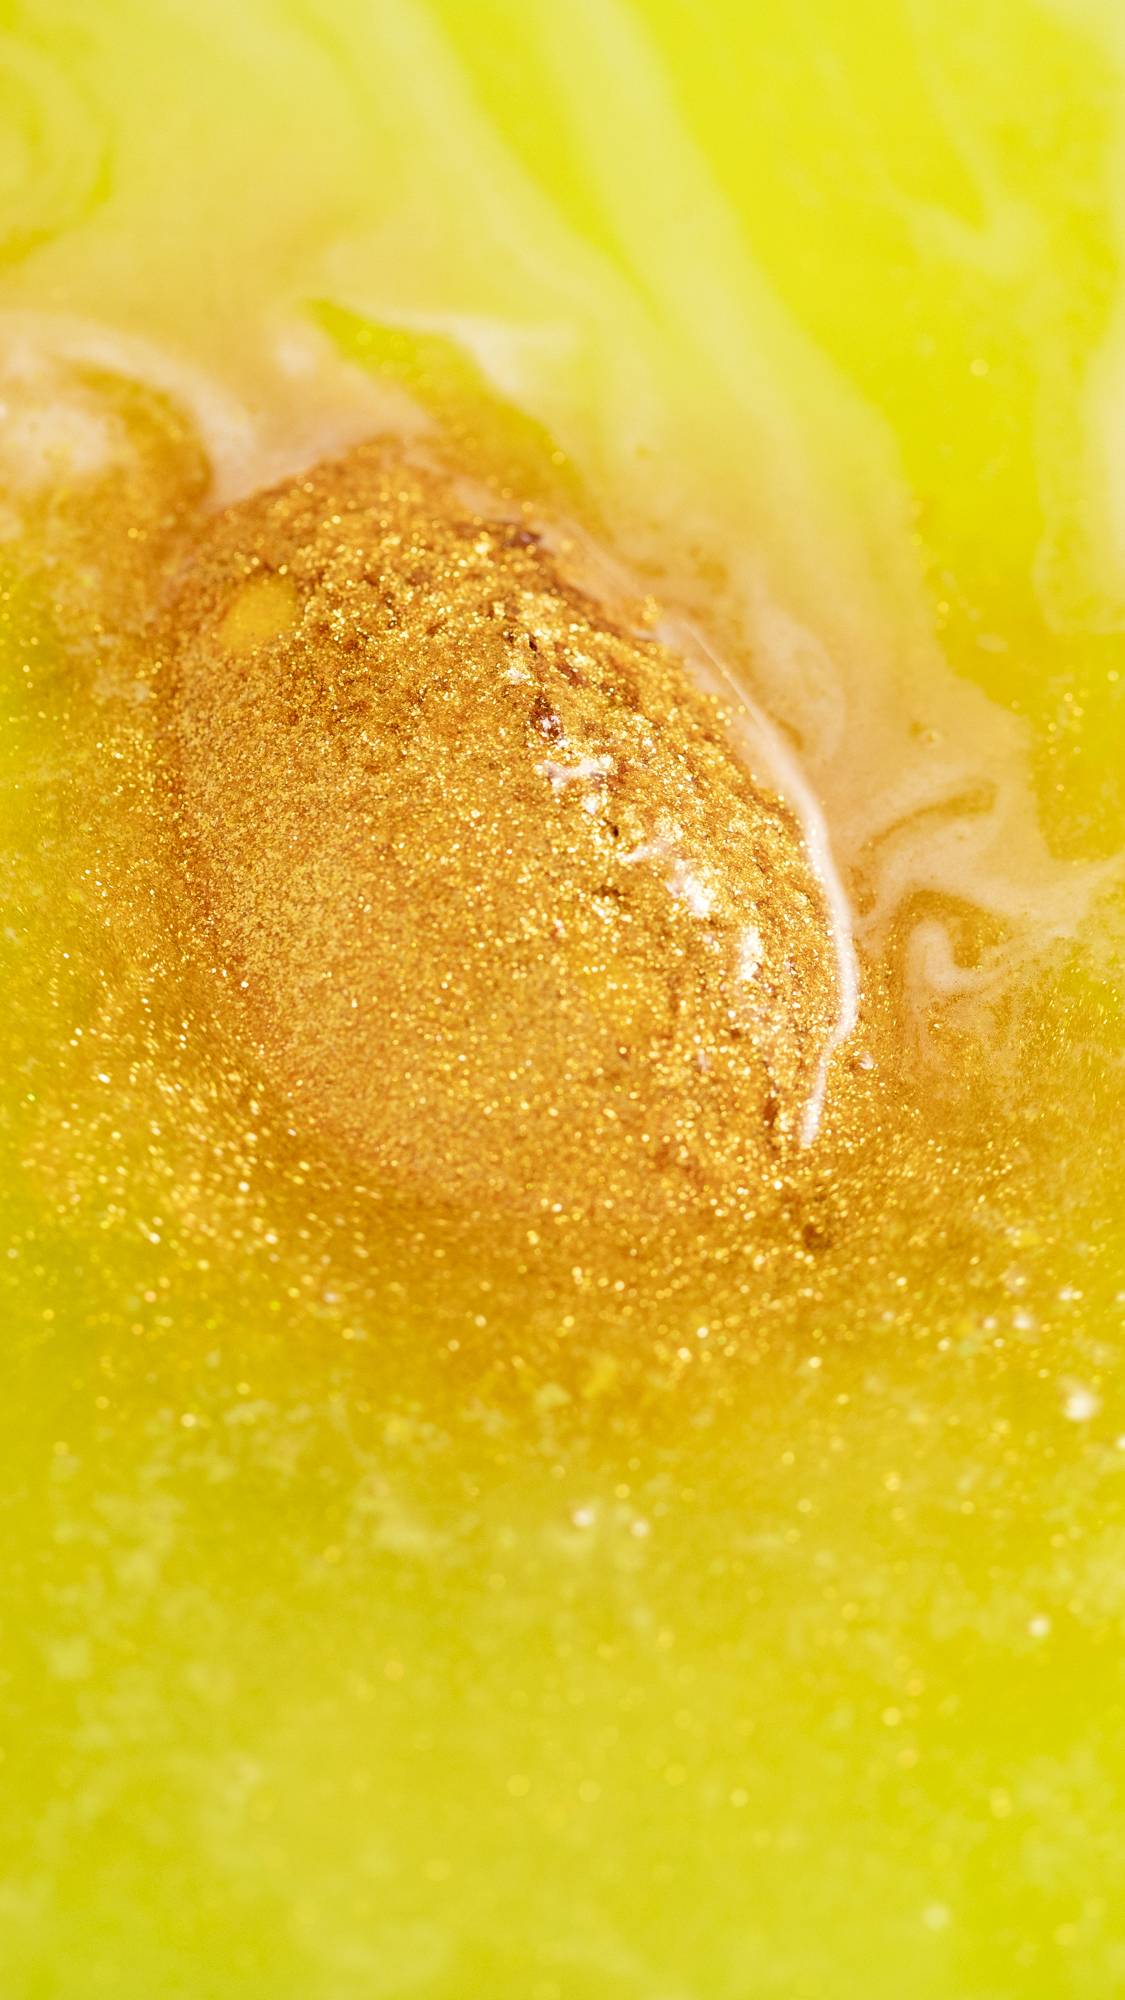 The Golden Egg bath bomb is dissolving in the bath watering giving off bright neon-yellow waters sprinkled with golden glitter throughout. 